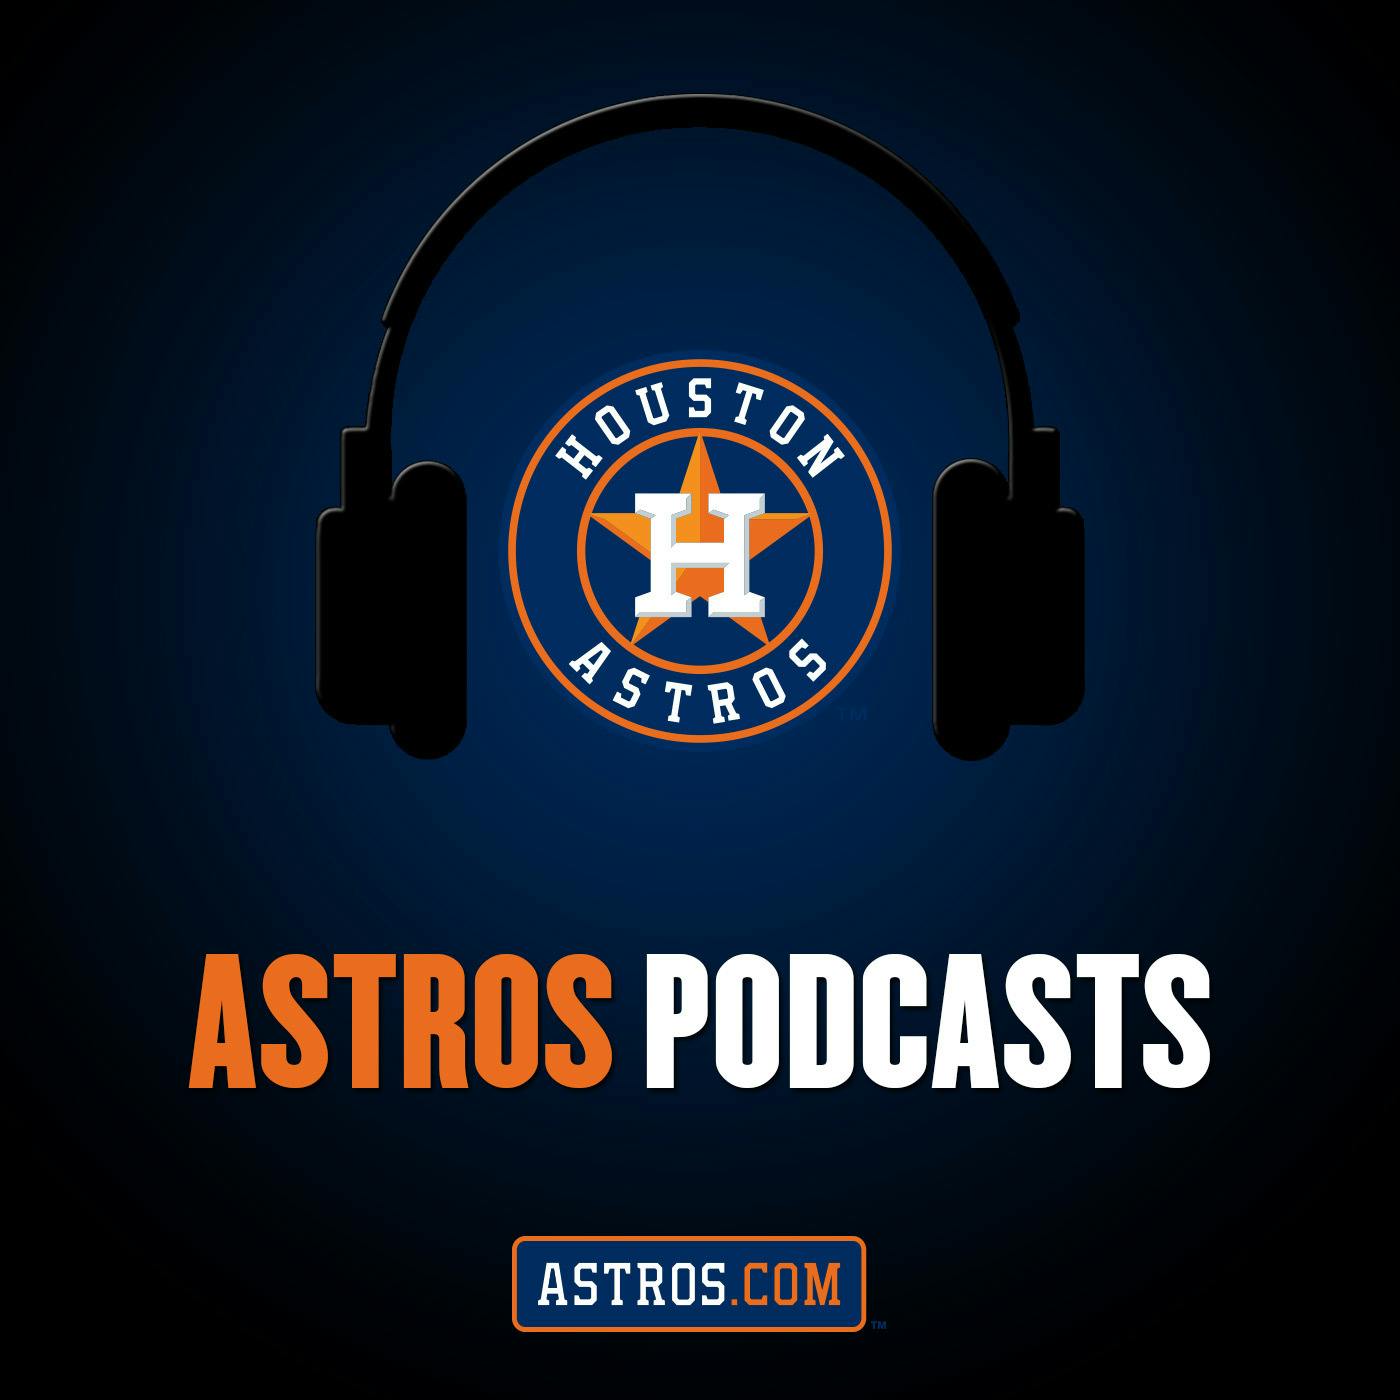 8/25 ASTROCAST by KARBACH BREWING: Manager Dusty Baker, Pitching Coach Brent Strom, Framber Valdez, Kyle Tucker, Carlos Correa, Myles Straw